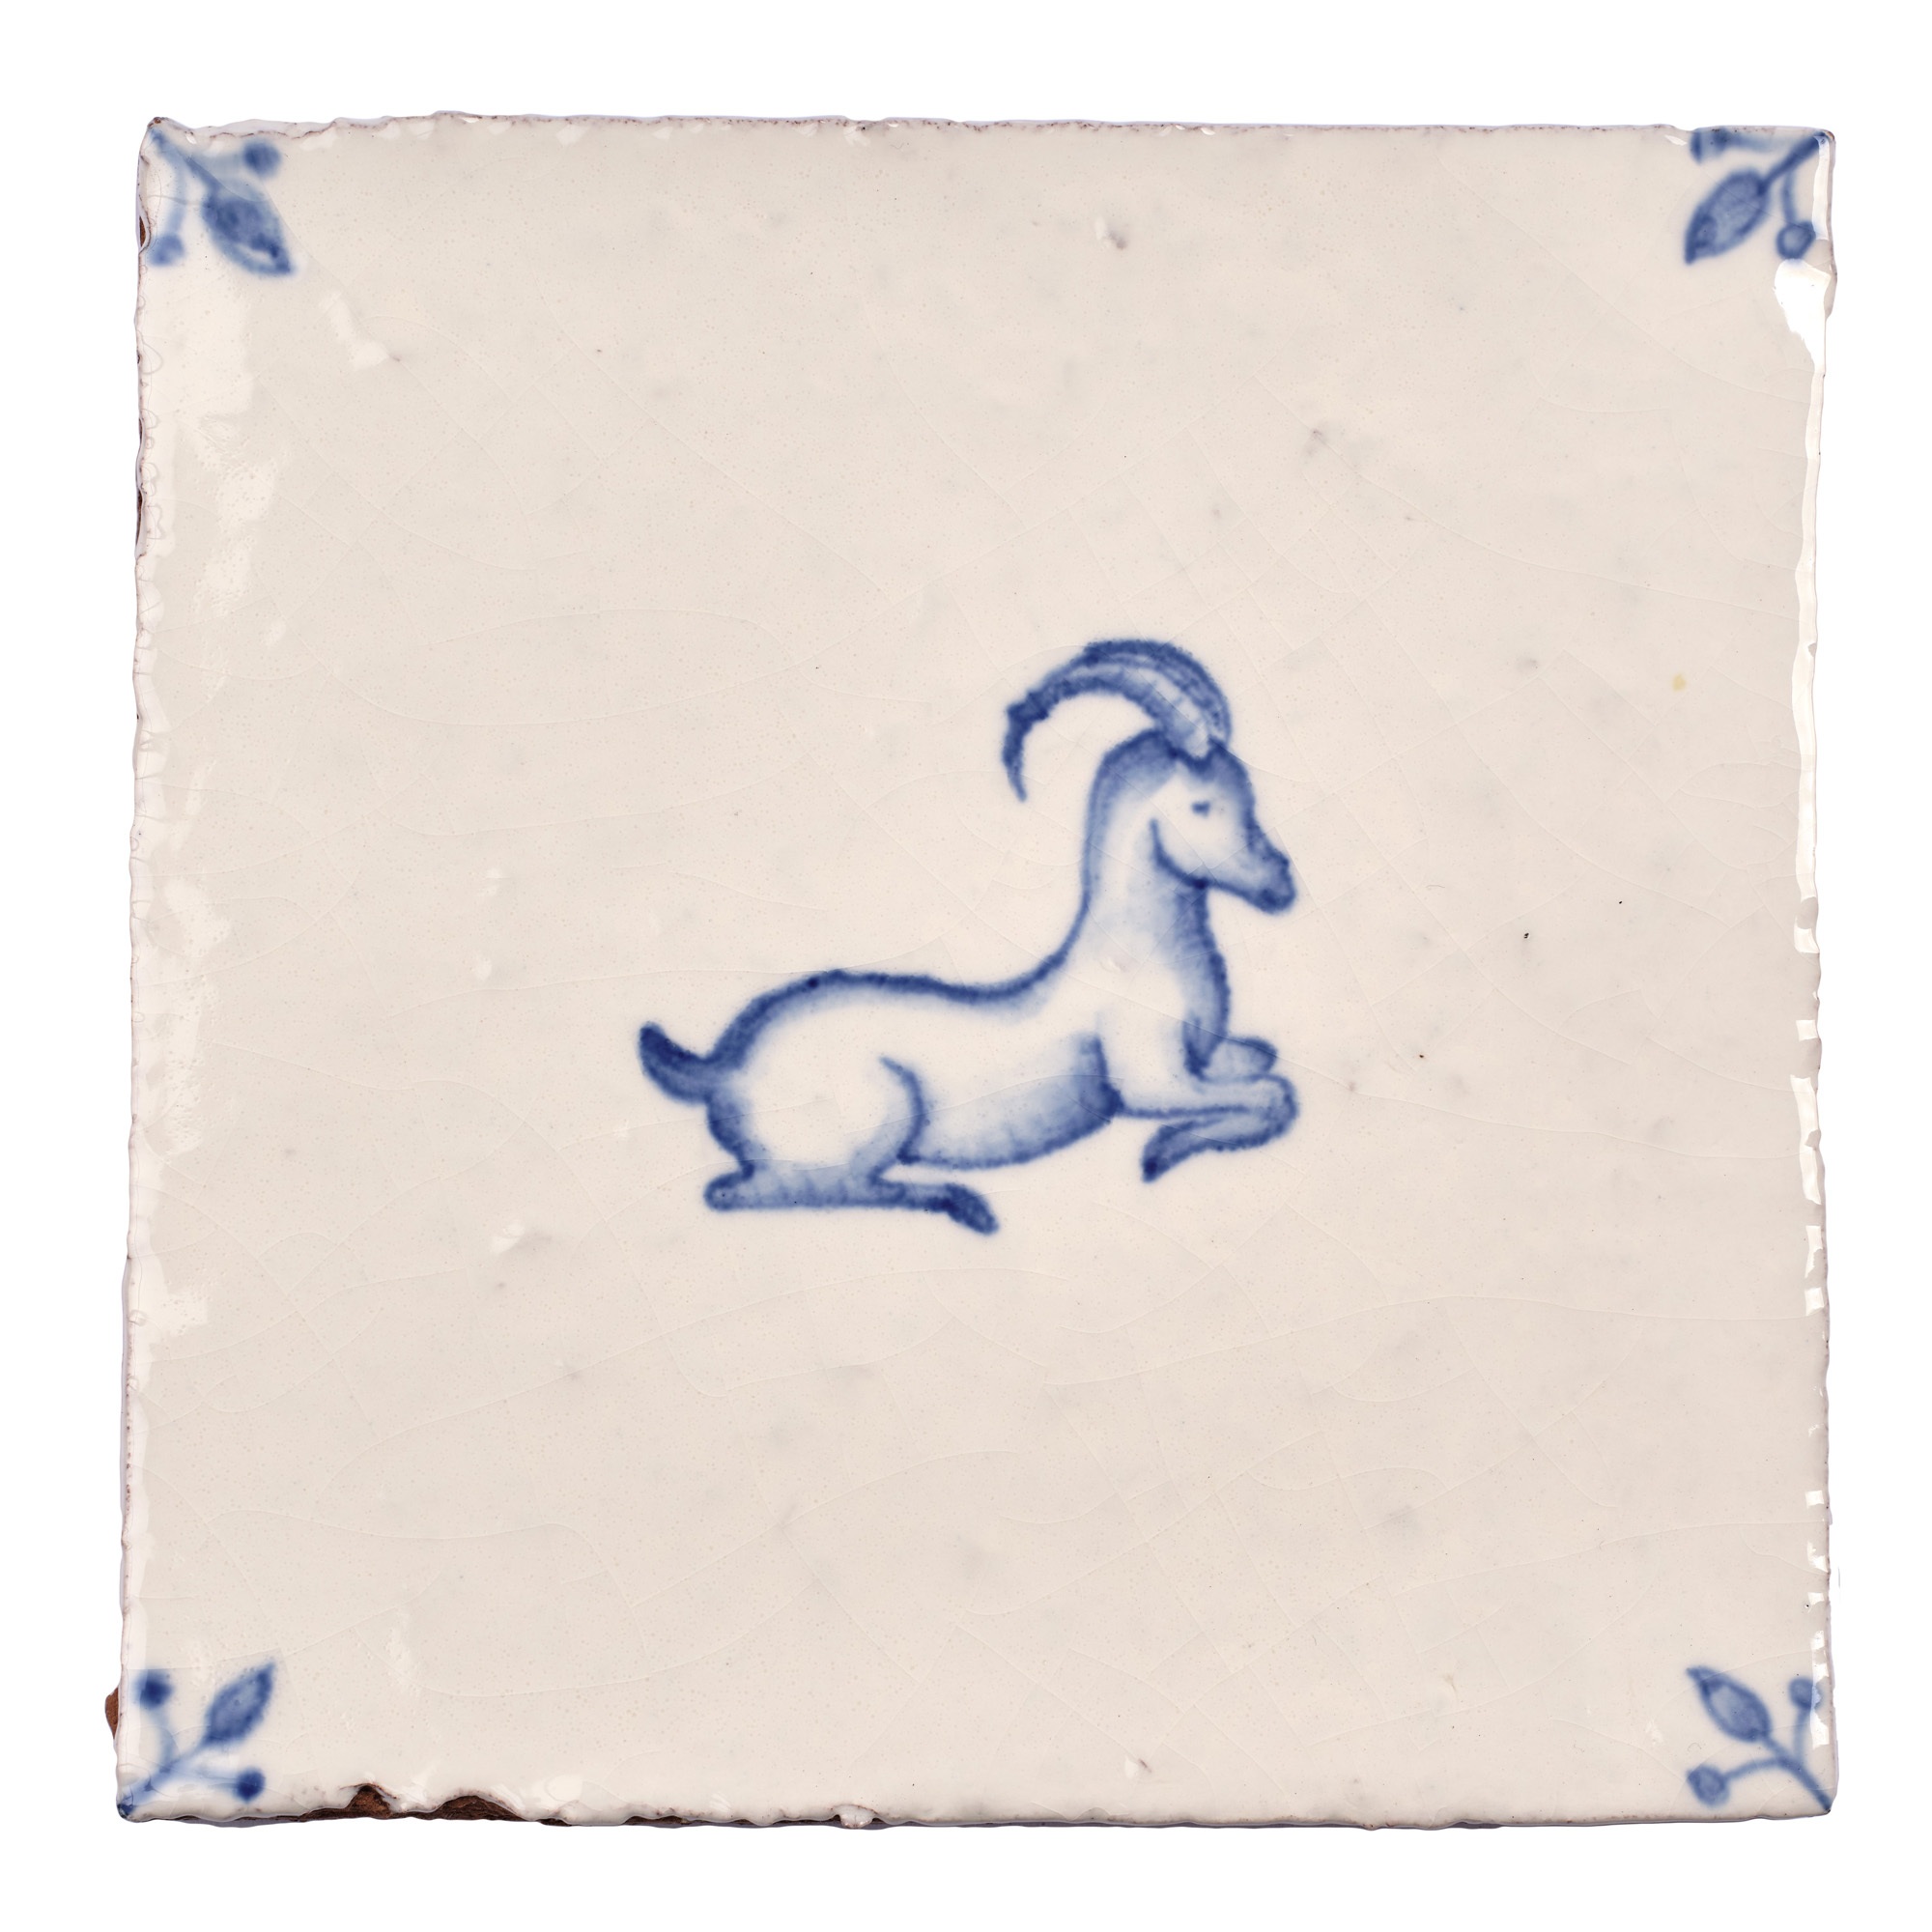 Wilding Ibex with Corner Motif Square, product variant image